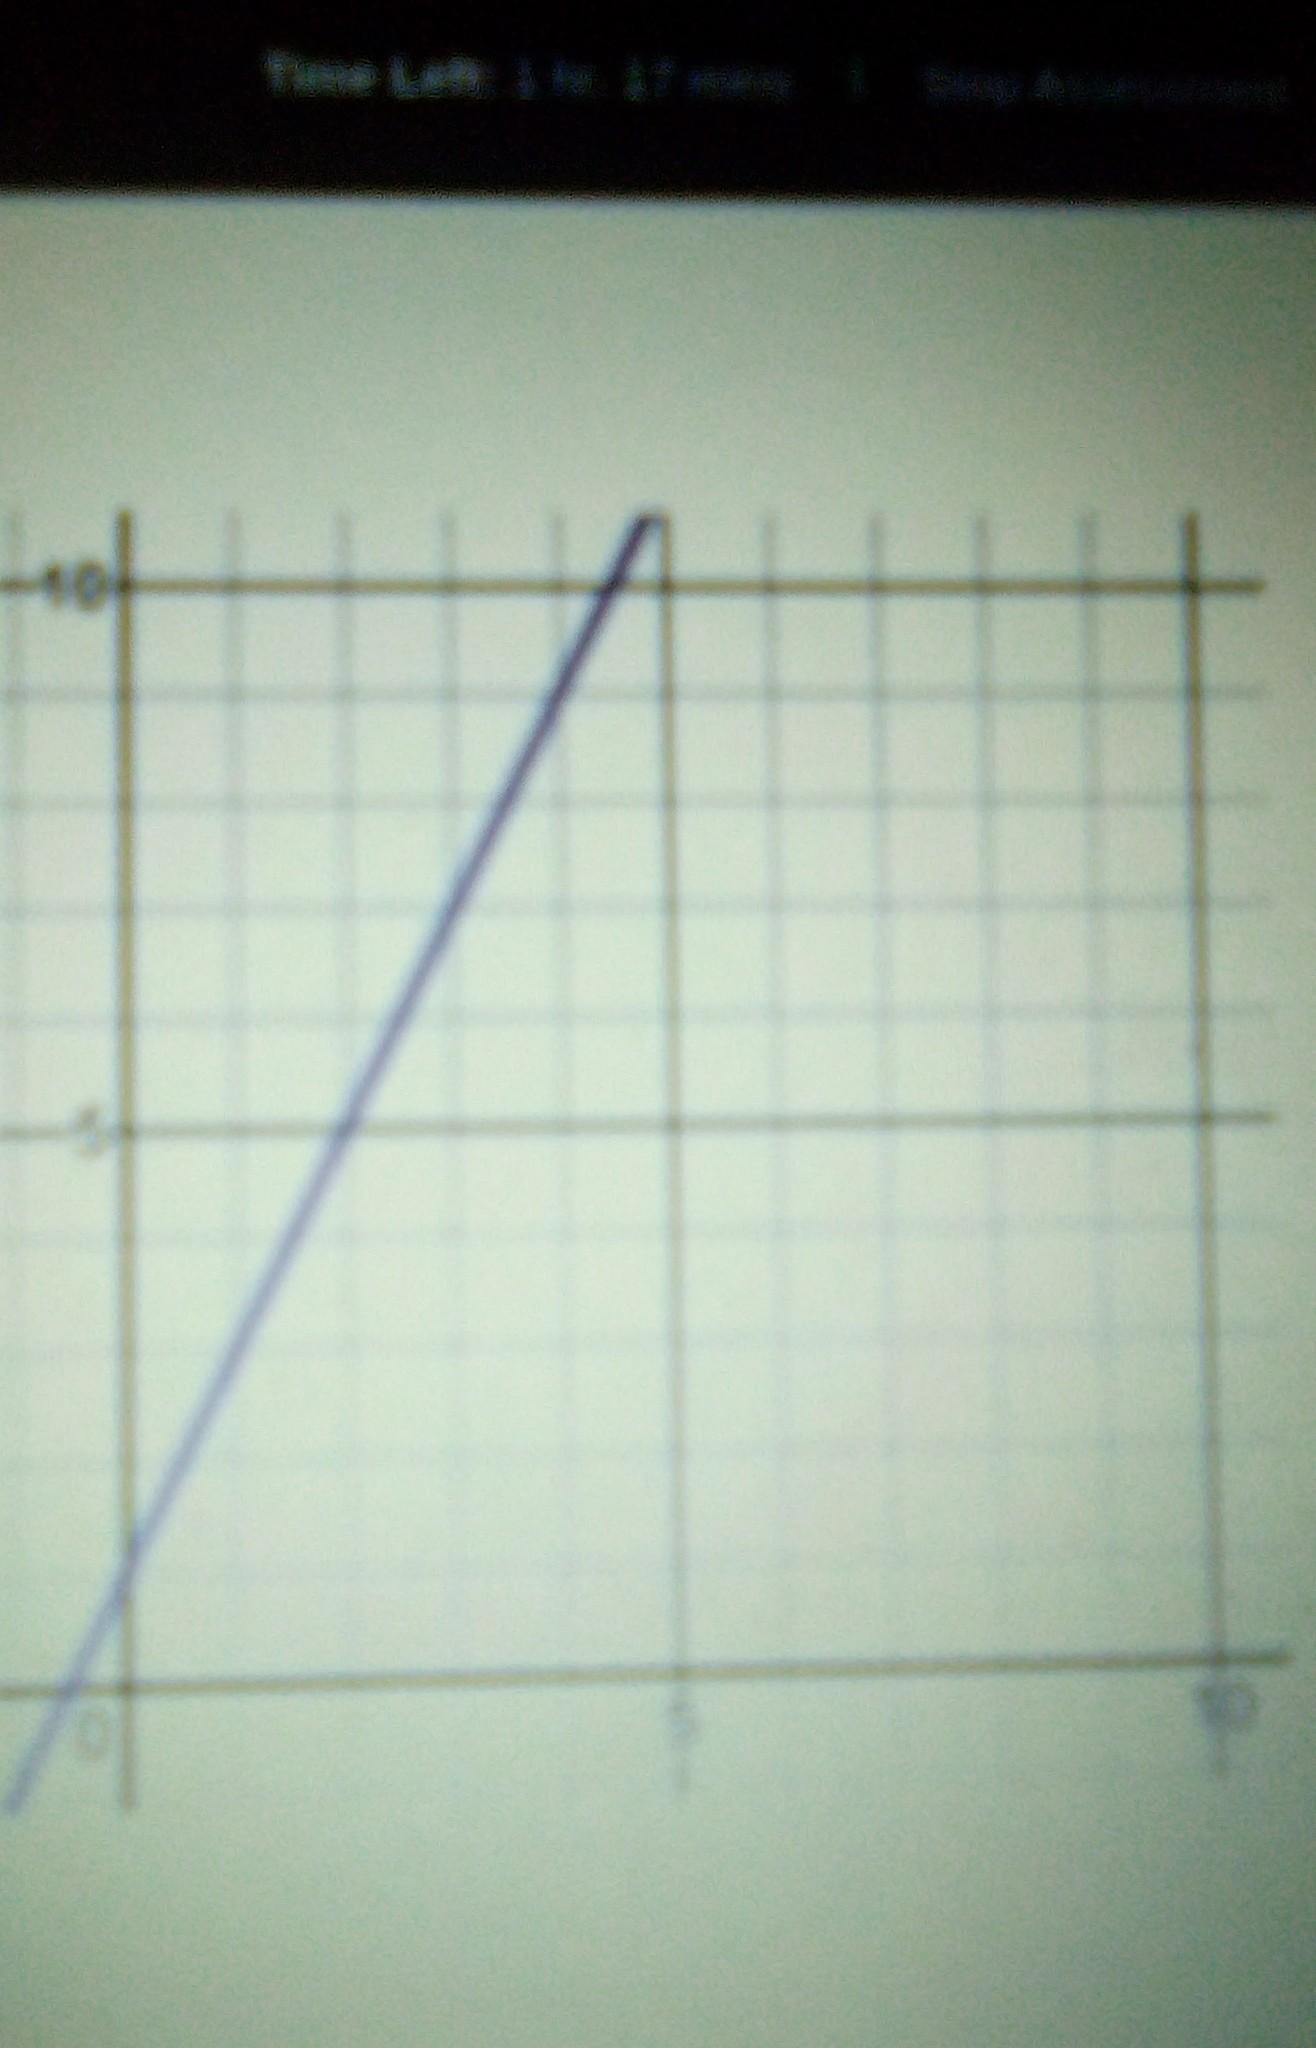 The Graph To The Right Represents The Cost Of A Taxi Where X Is Distance In Miles And Y Is Cost $10 What